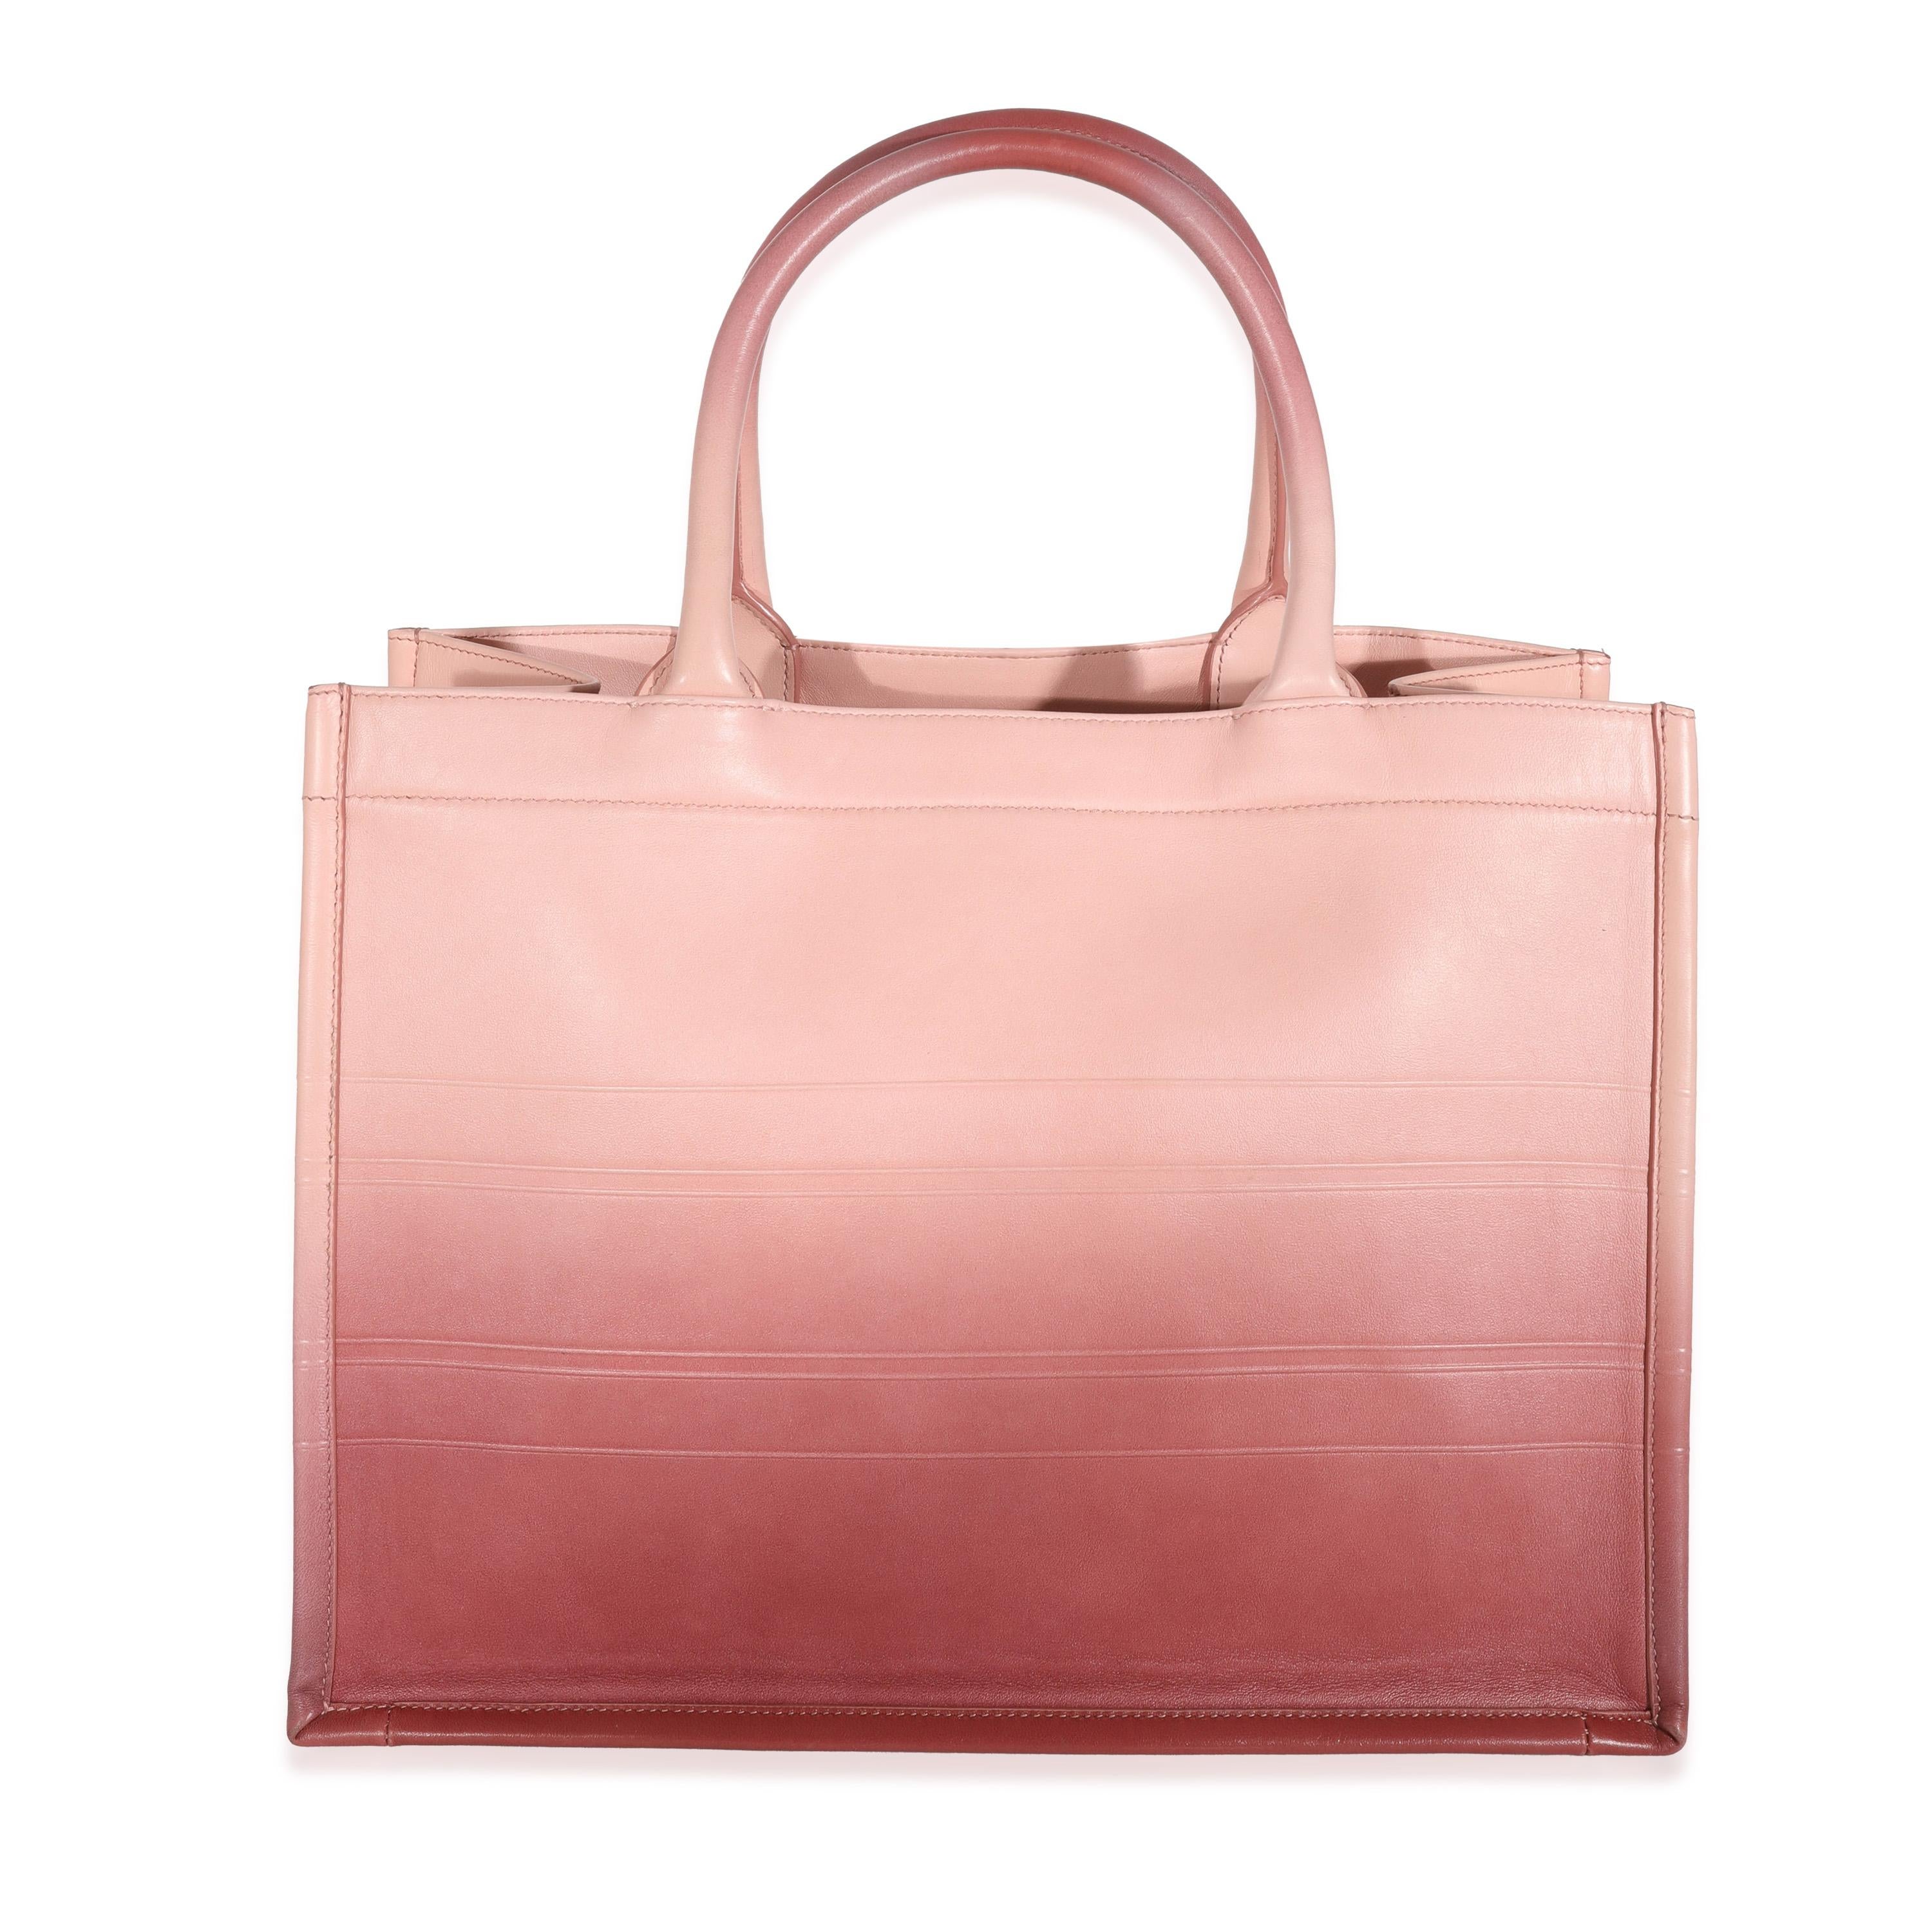 Christian Dior Pink Gradient Leather Medium Book Tote For Sale 2